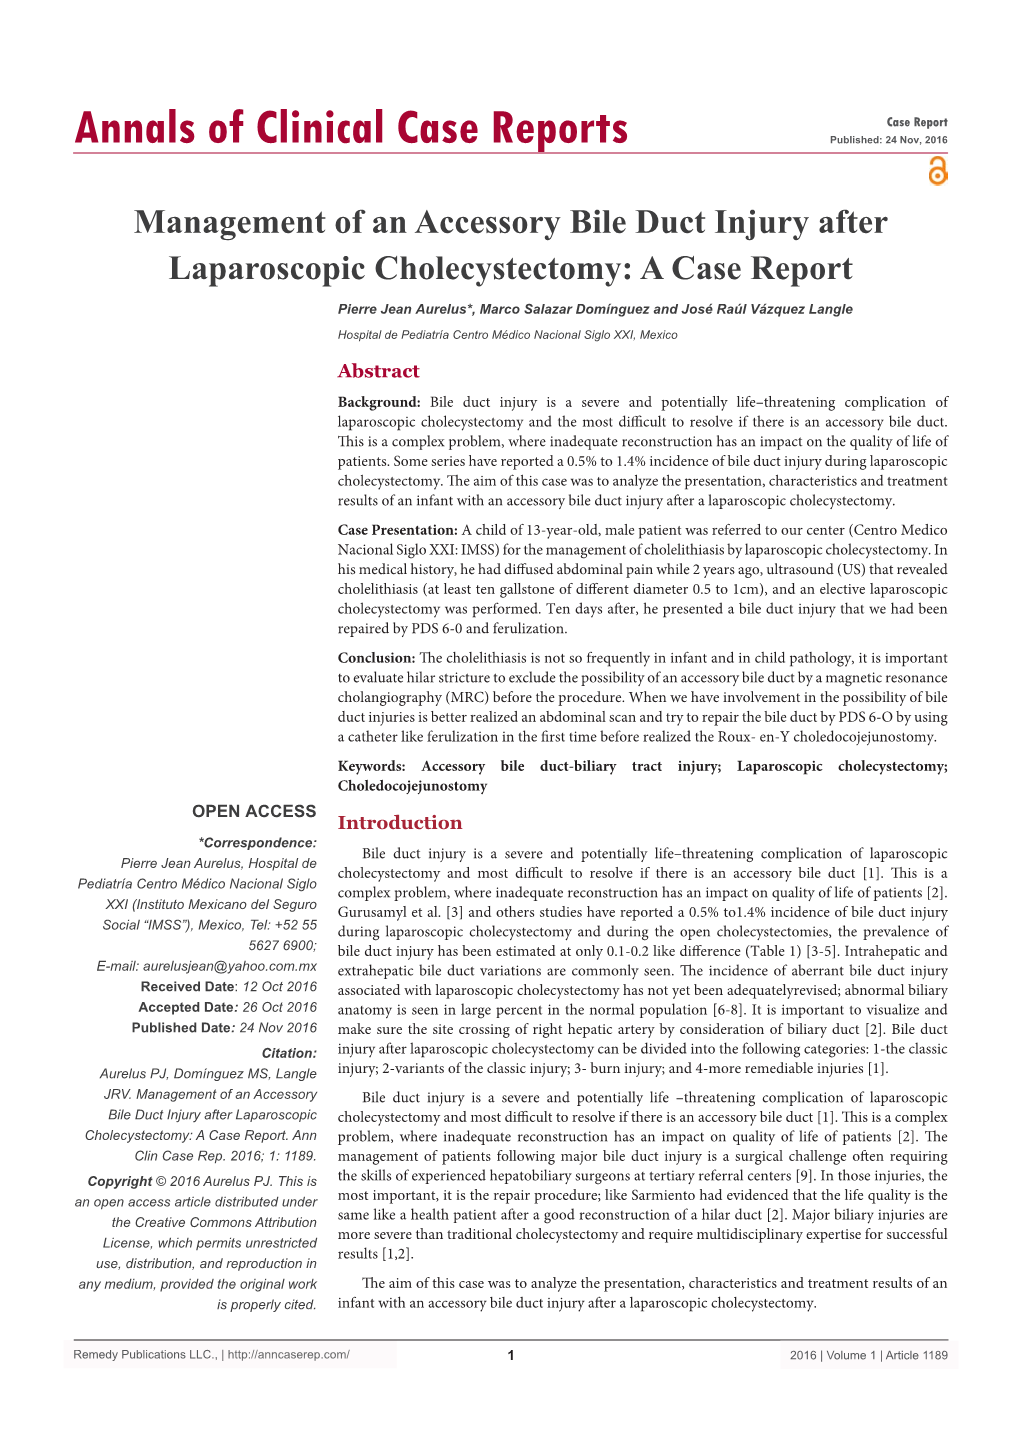 Management of an Accessory Bile Duct Injury After Laparoscopic Cholecystectomy: a Case Report